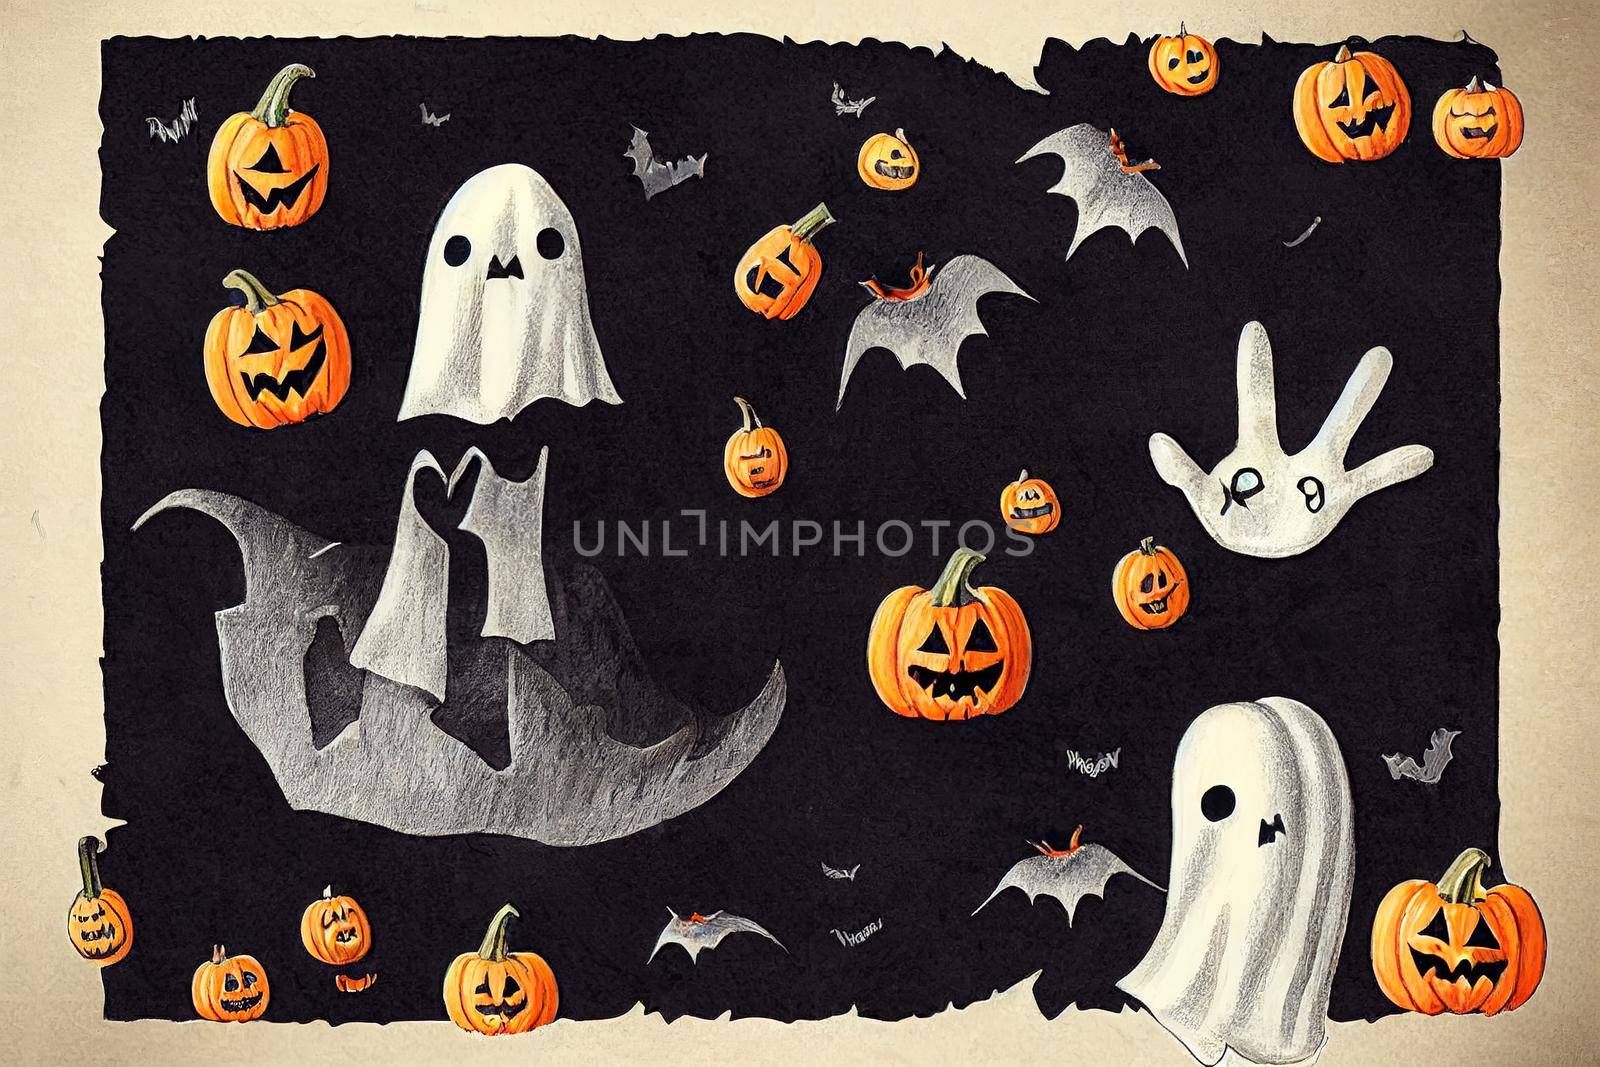 Cute Hand Drawn Halloween Cards and Pattern, Little White Ghost on a Black Background, Happy Halloween, Trick or Treat, Sweet Little Pumpkins and White Funny Skulls, Gravestone with Boo inscription v3